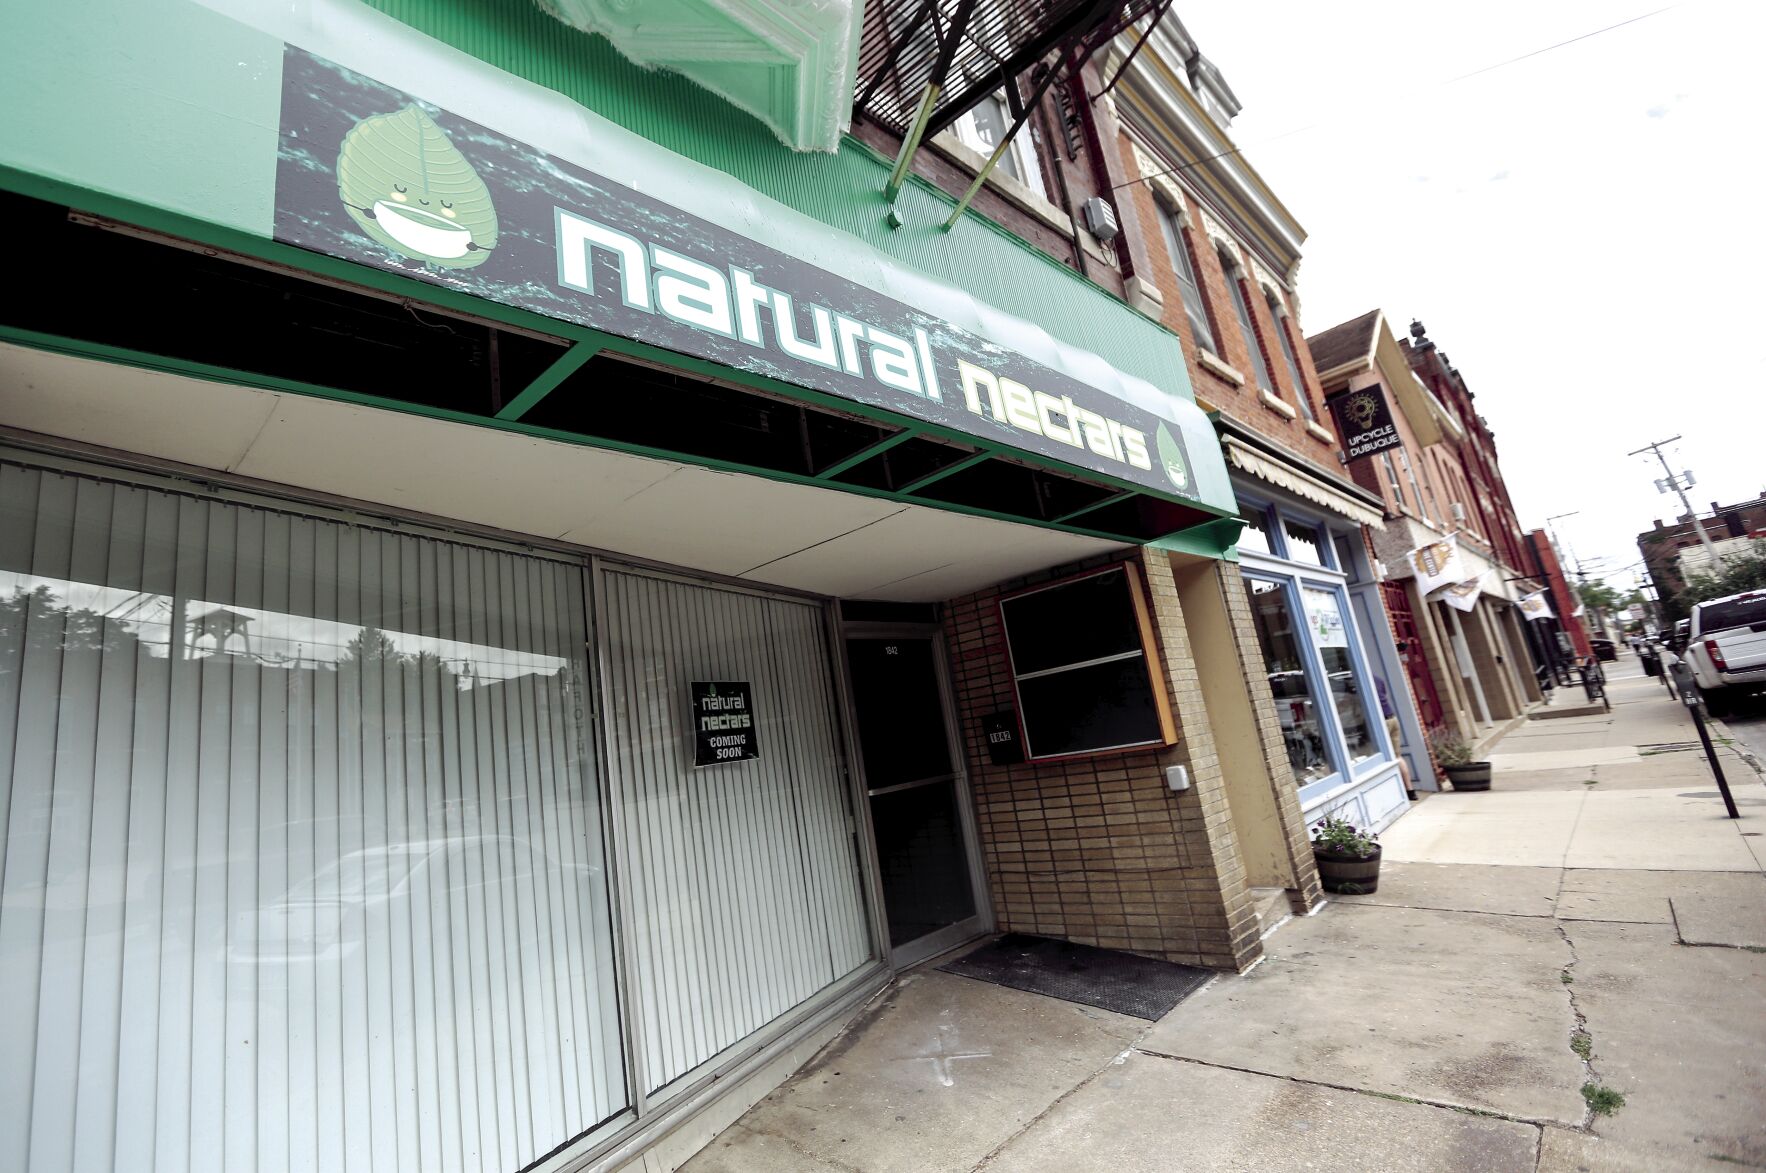 Natural Nectars, 1842 Central Ave., is set to open in a couple weeks as an alternative to bars and breweries.    PHOTO CREDIT: Dave Kettering